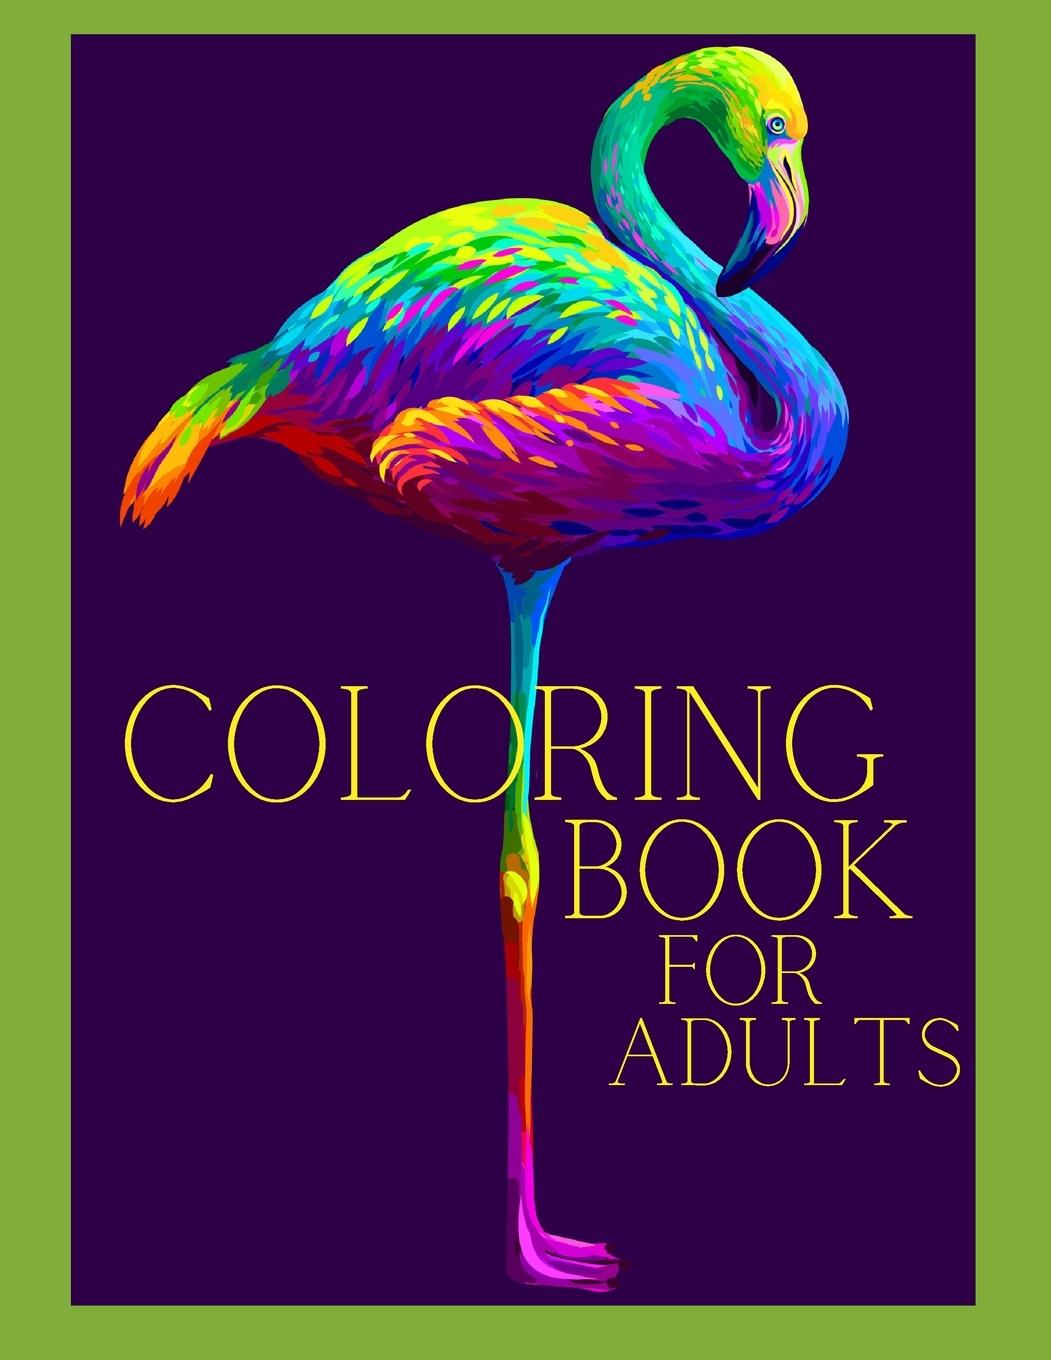 Coloring Book for Adults Animals Coloring Book Adult   Stress Relieving Animal Designs, Mandala, Flowers and More..  Relaxation coloring - Leveque, Gul